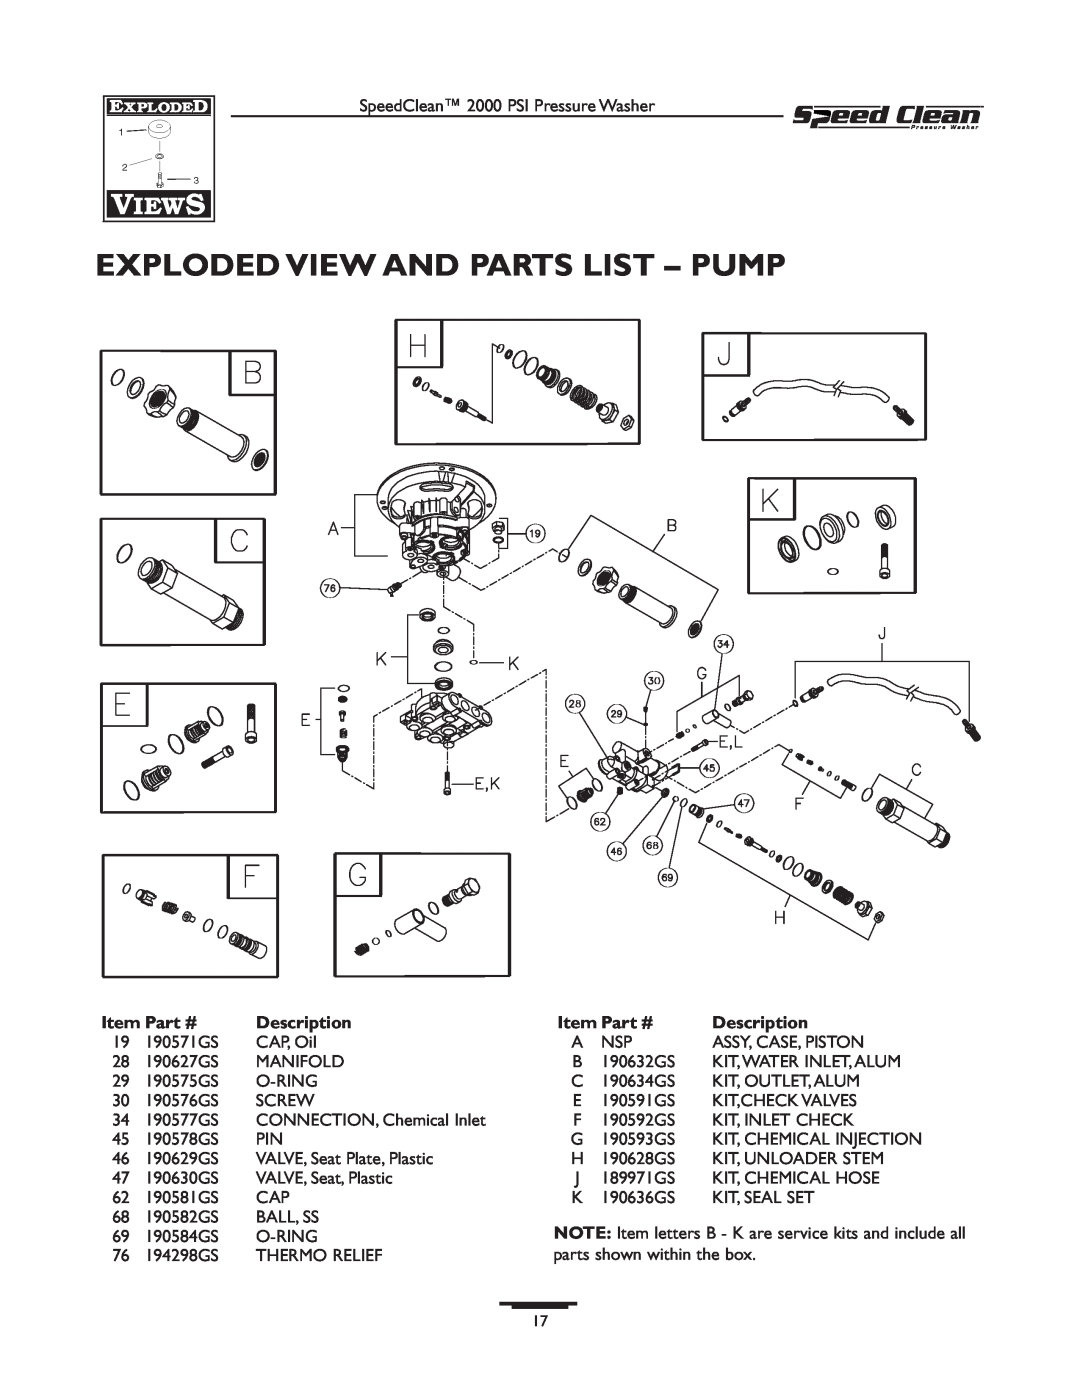 Briggs & Stratton 020211-0 owner manual Exploded View And Parts List - Pump, Description 